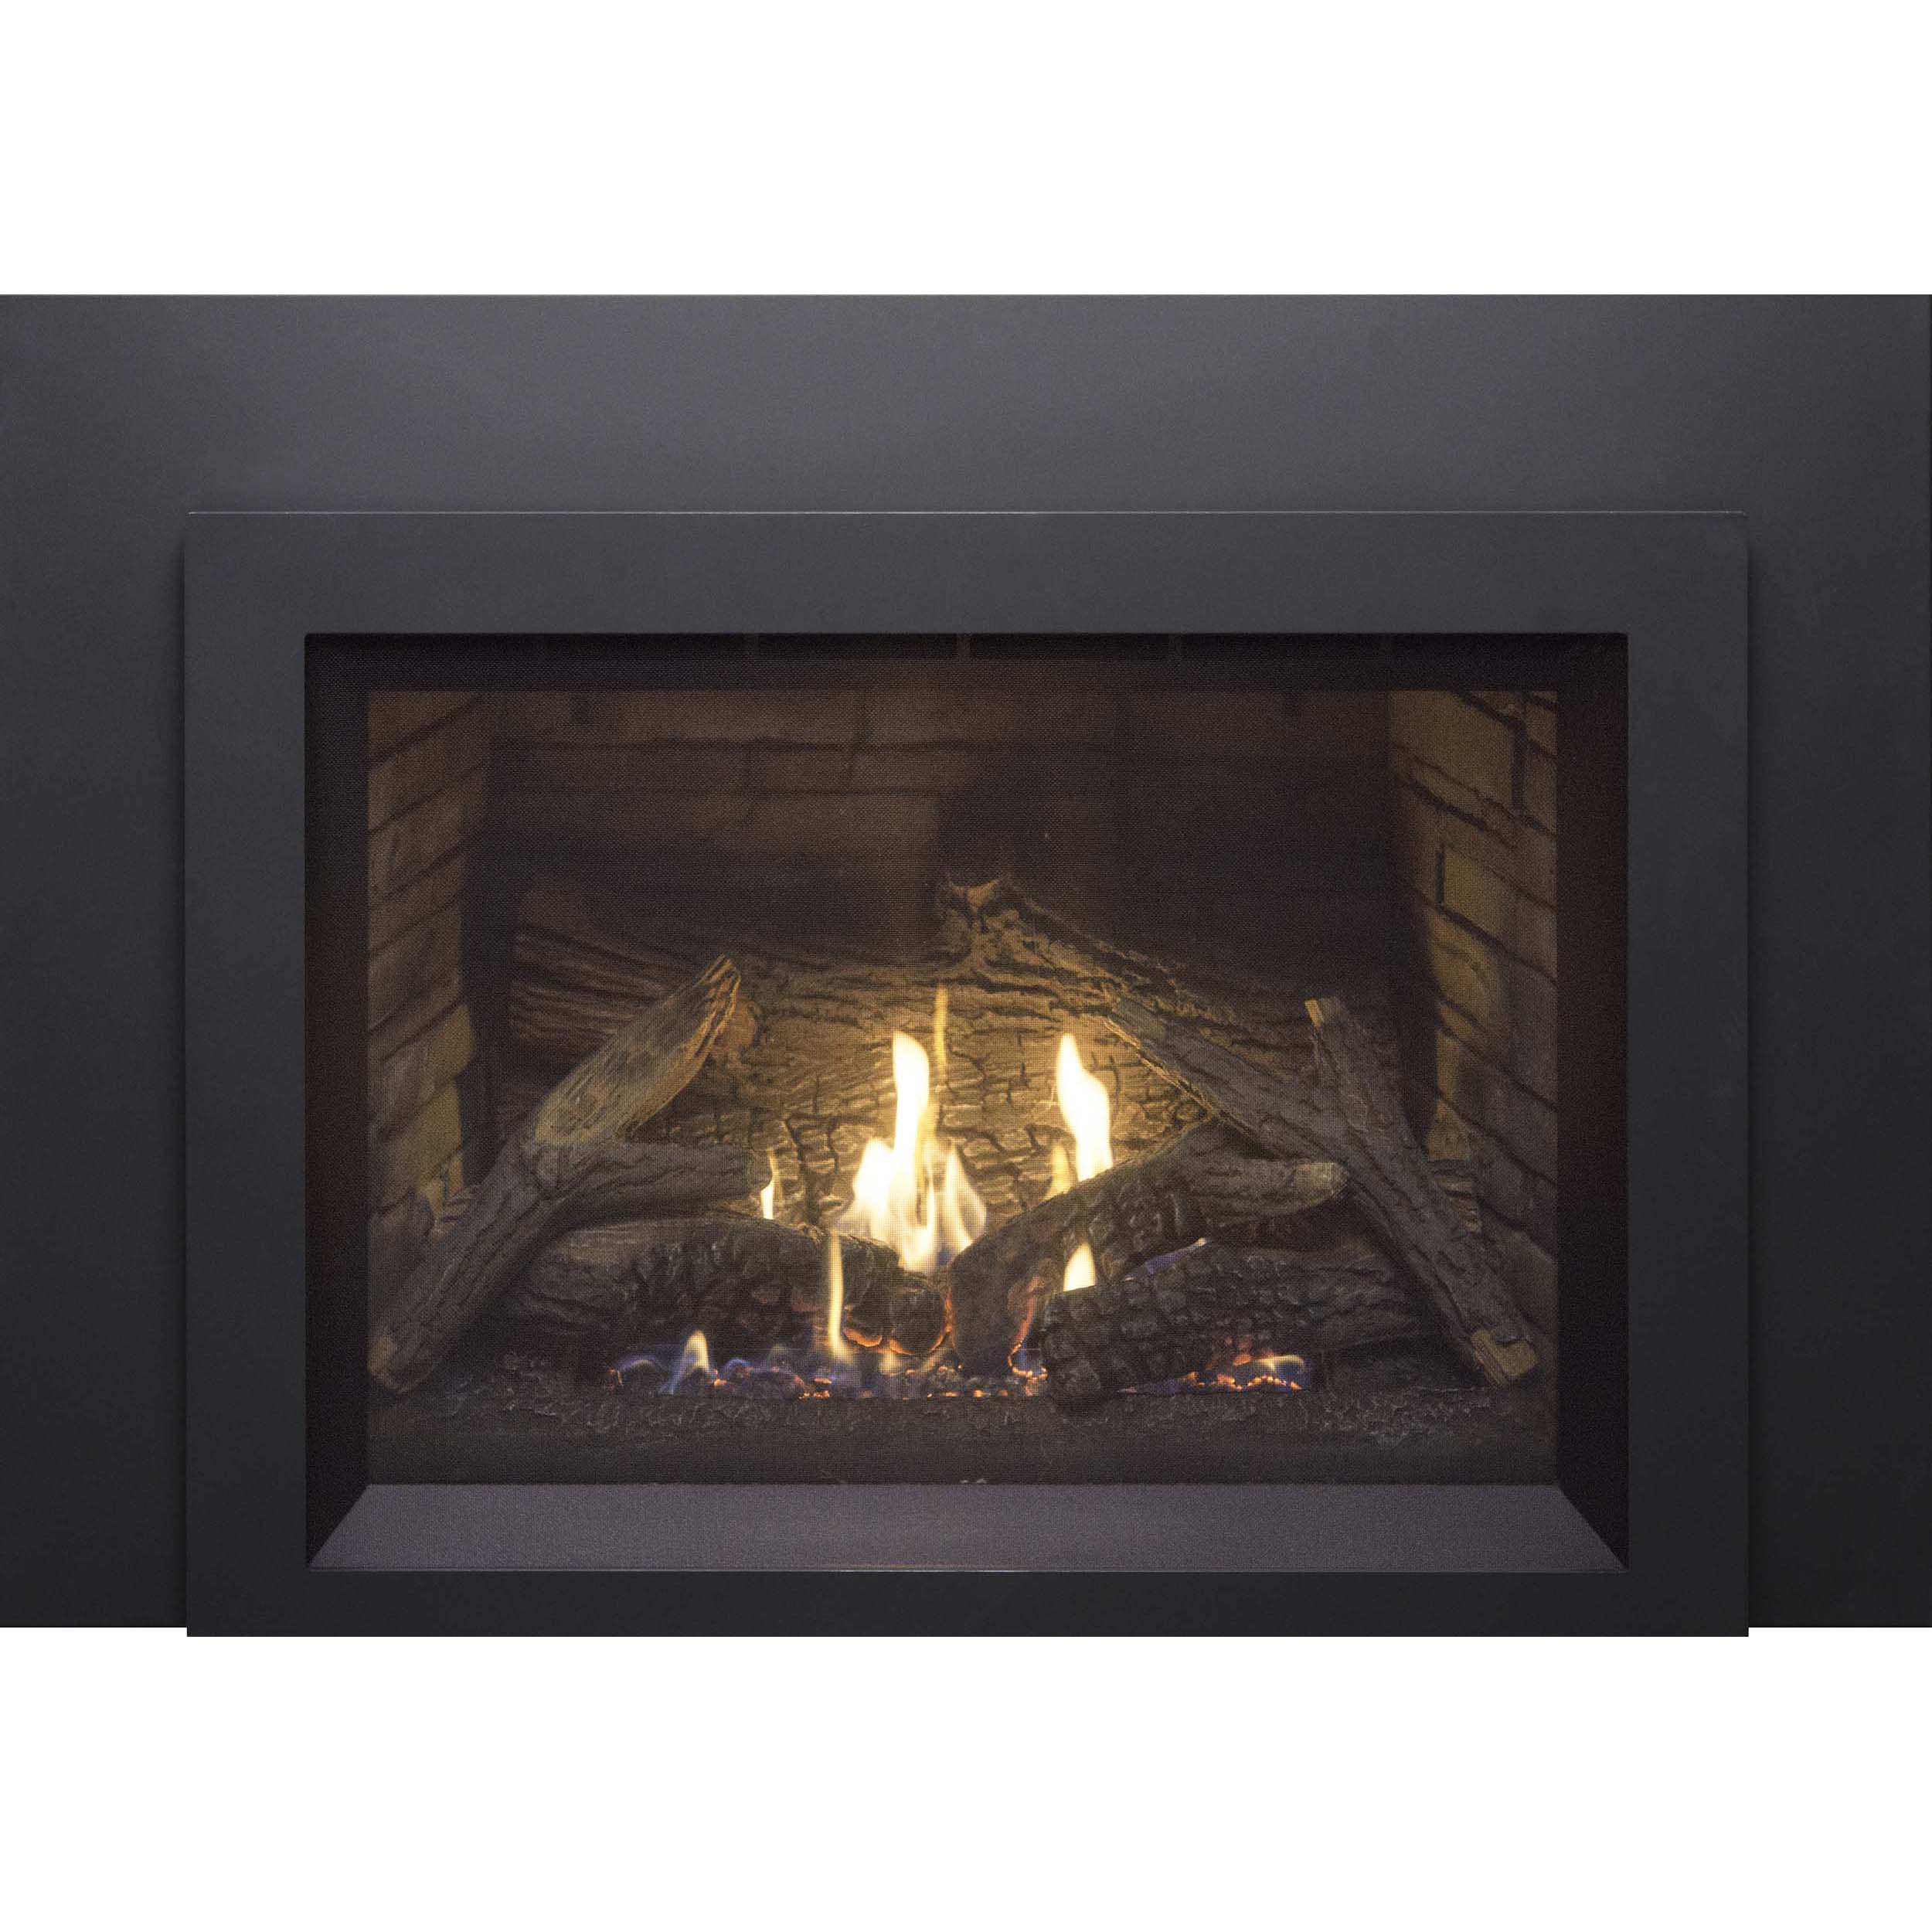 Pacific Energy Tofino I30 - Direct Vent Gas Fireplace Insert - Sit Valve